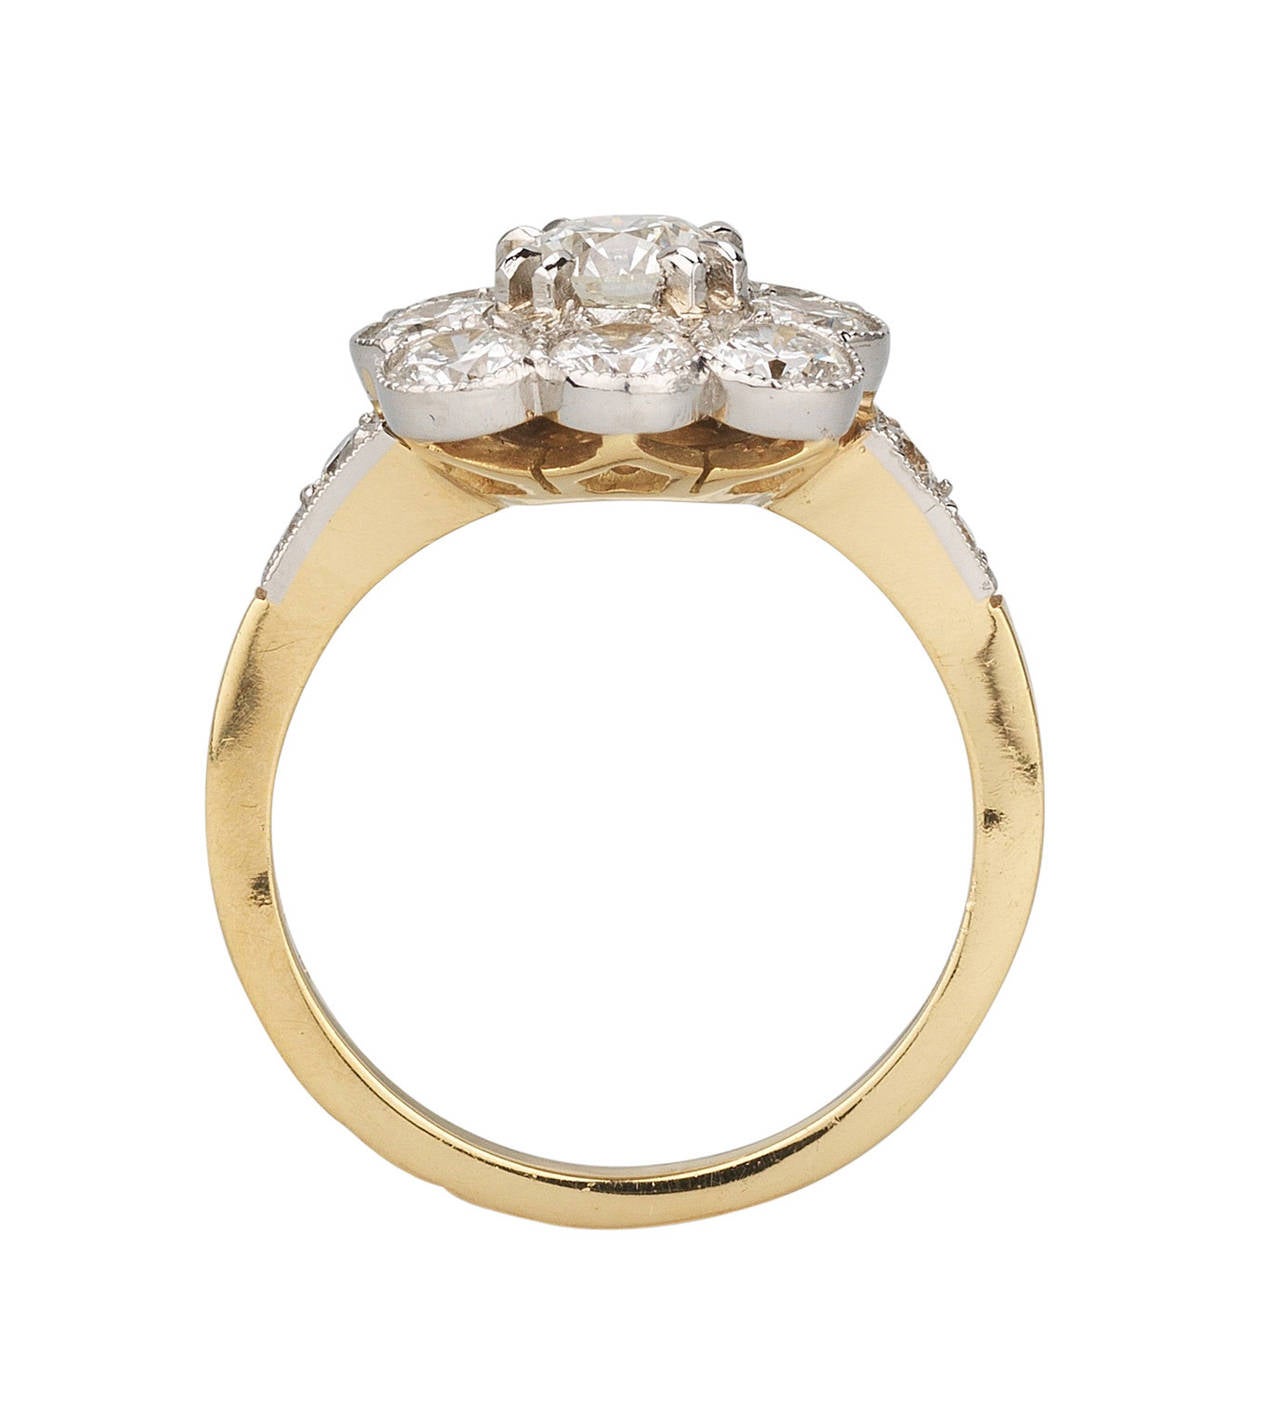 Platinum and yellow gold (18kt) Diamond Ring. Contemporary Antique Style.
French marks.

Total weight of the diamonds: 1.75 carats
In addition the weight of the center diamond: 0.64 carat

Total weight of the ring: 6.5 grams